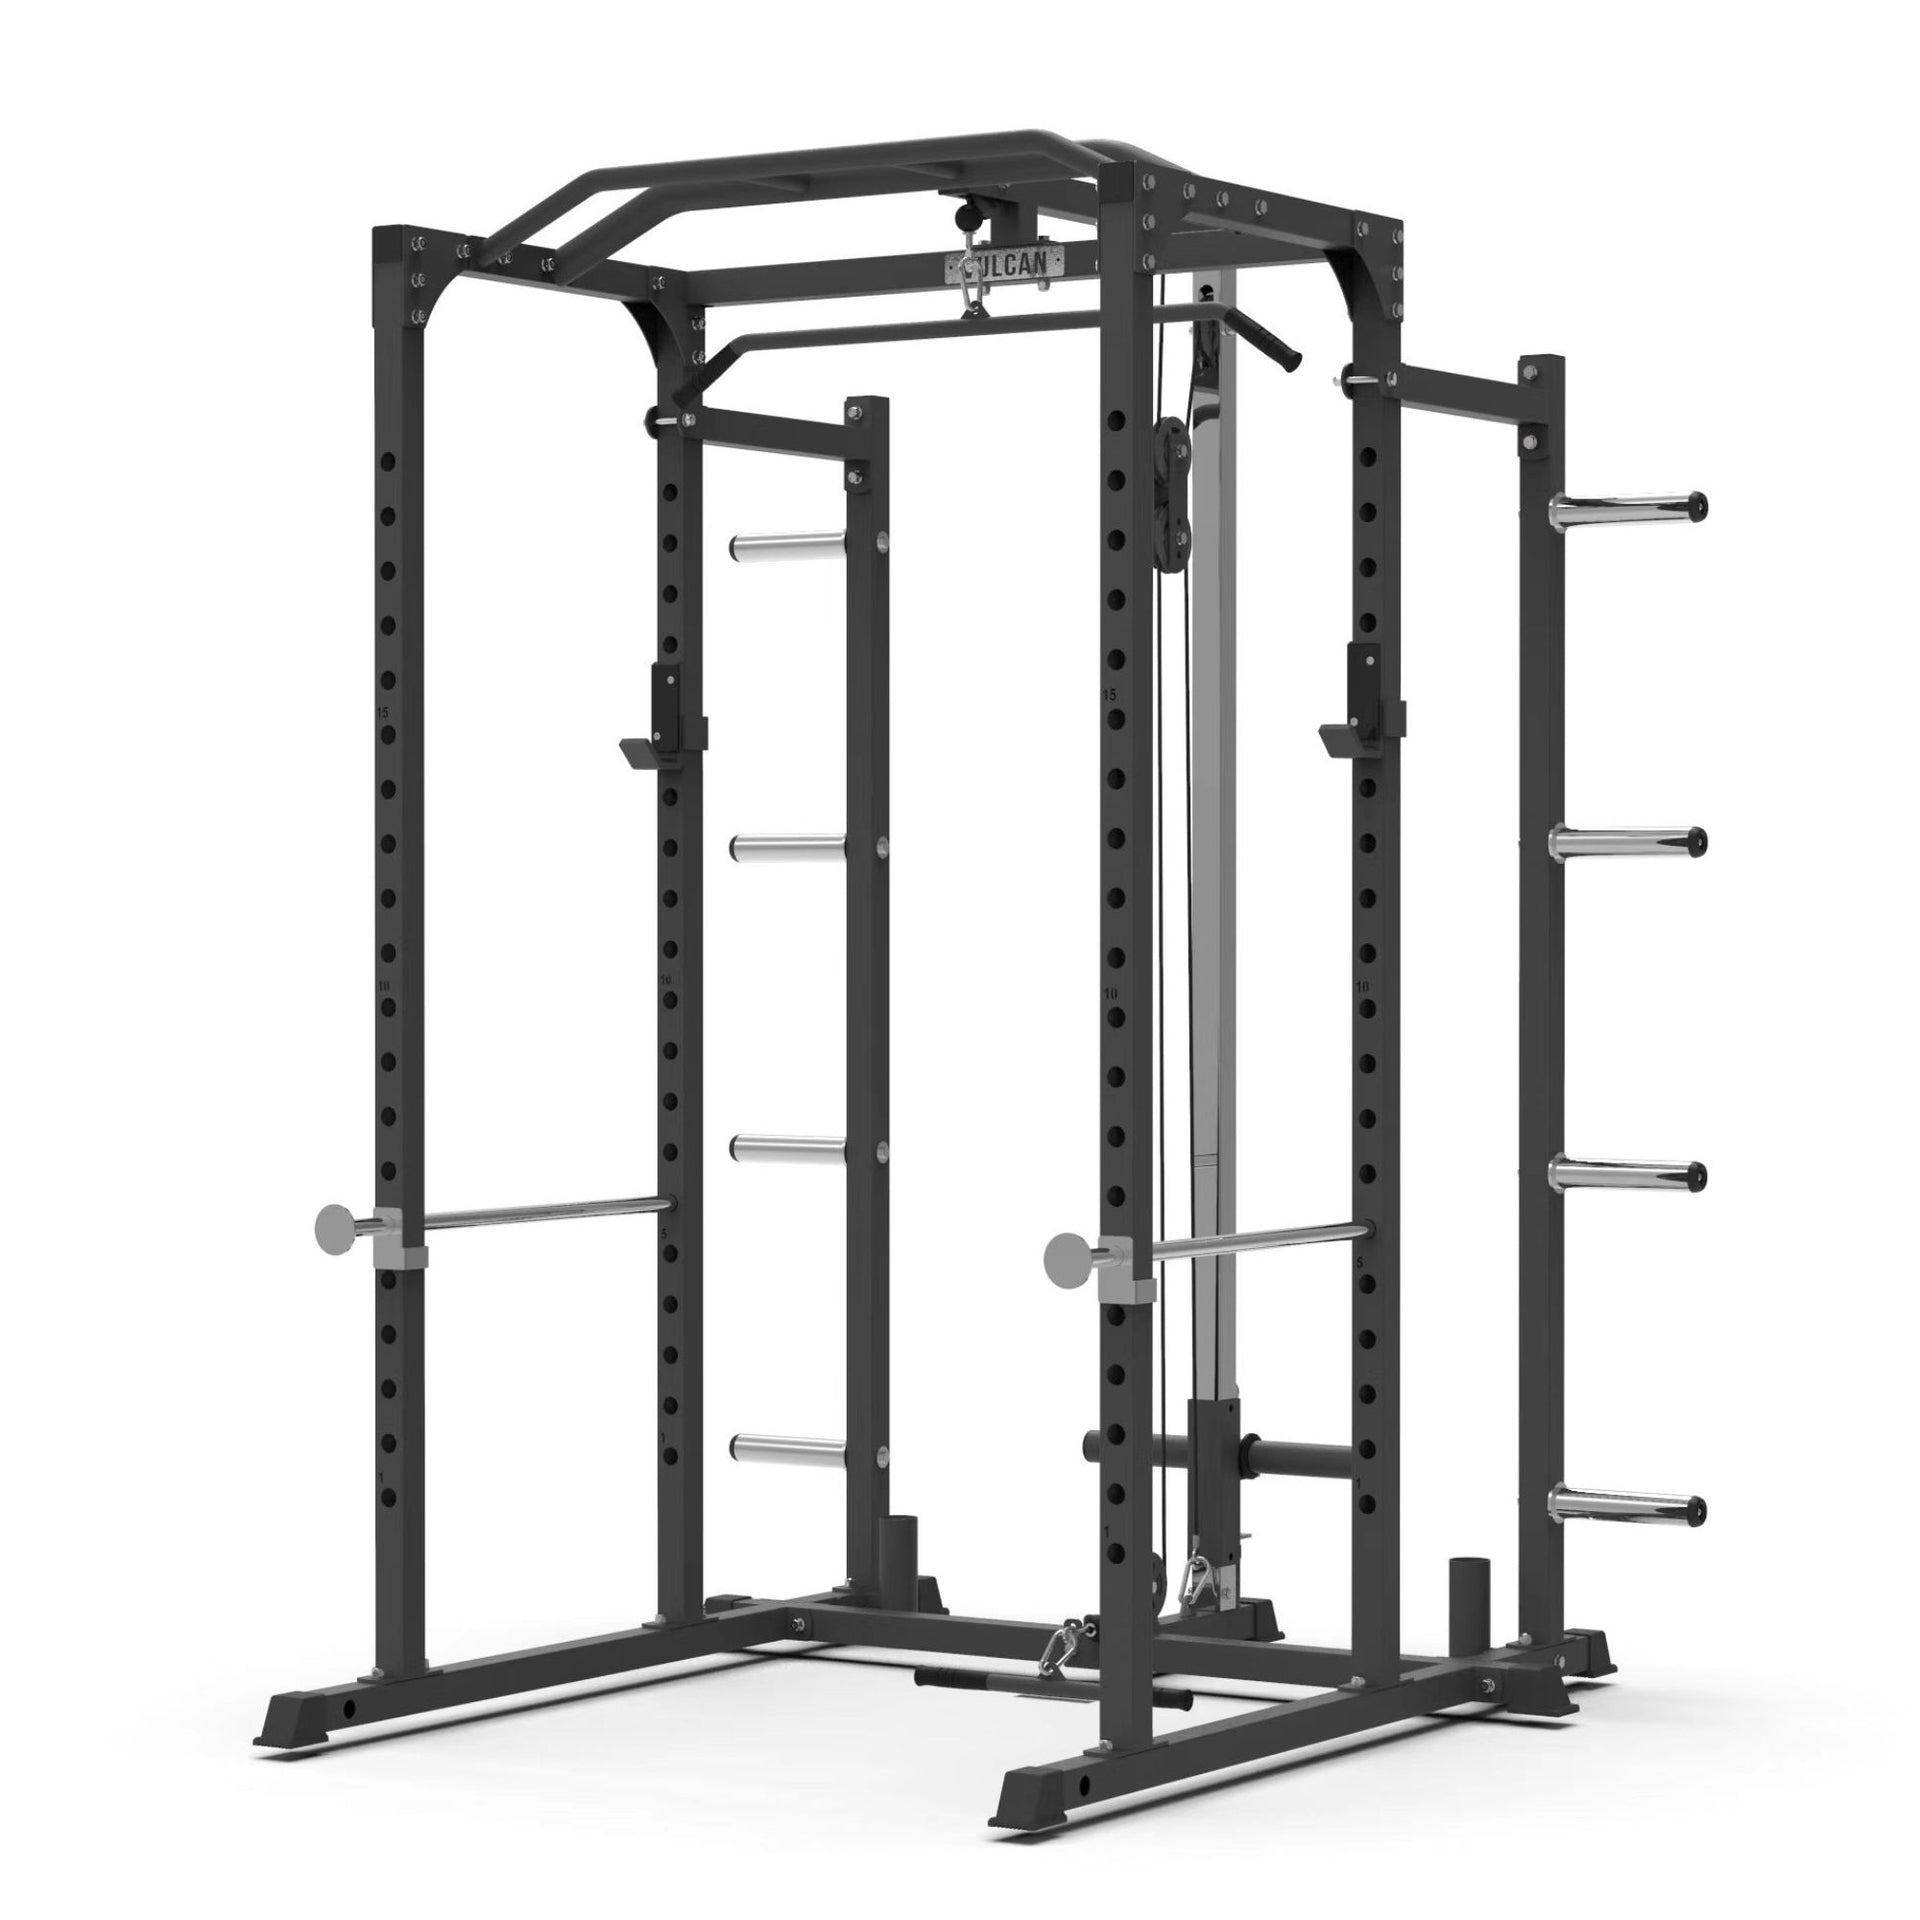 Home gym power rack with lat/row attachment and extension kit